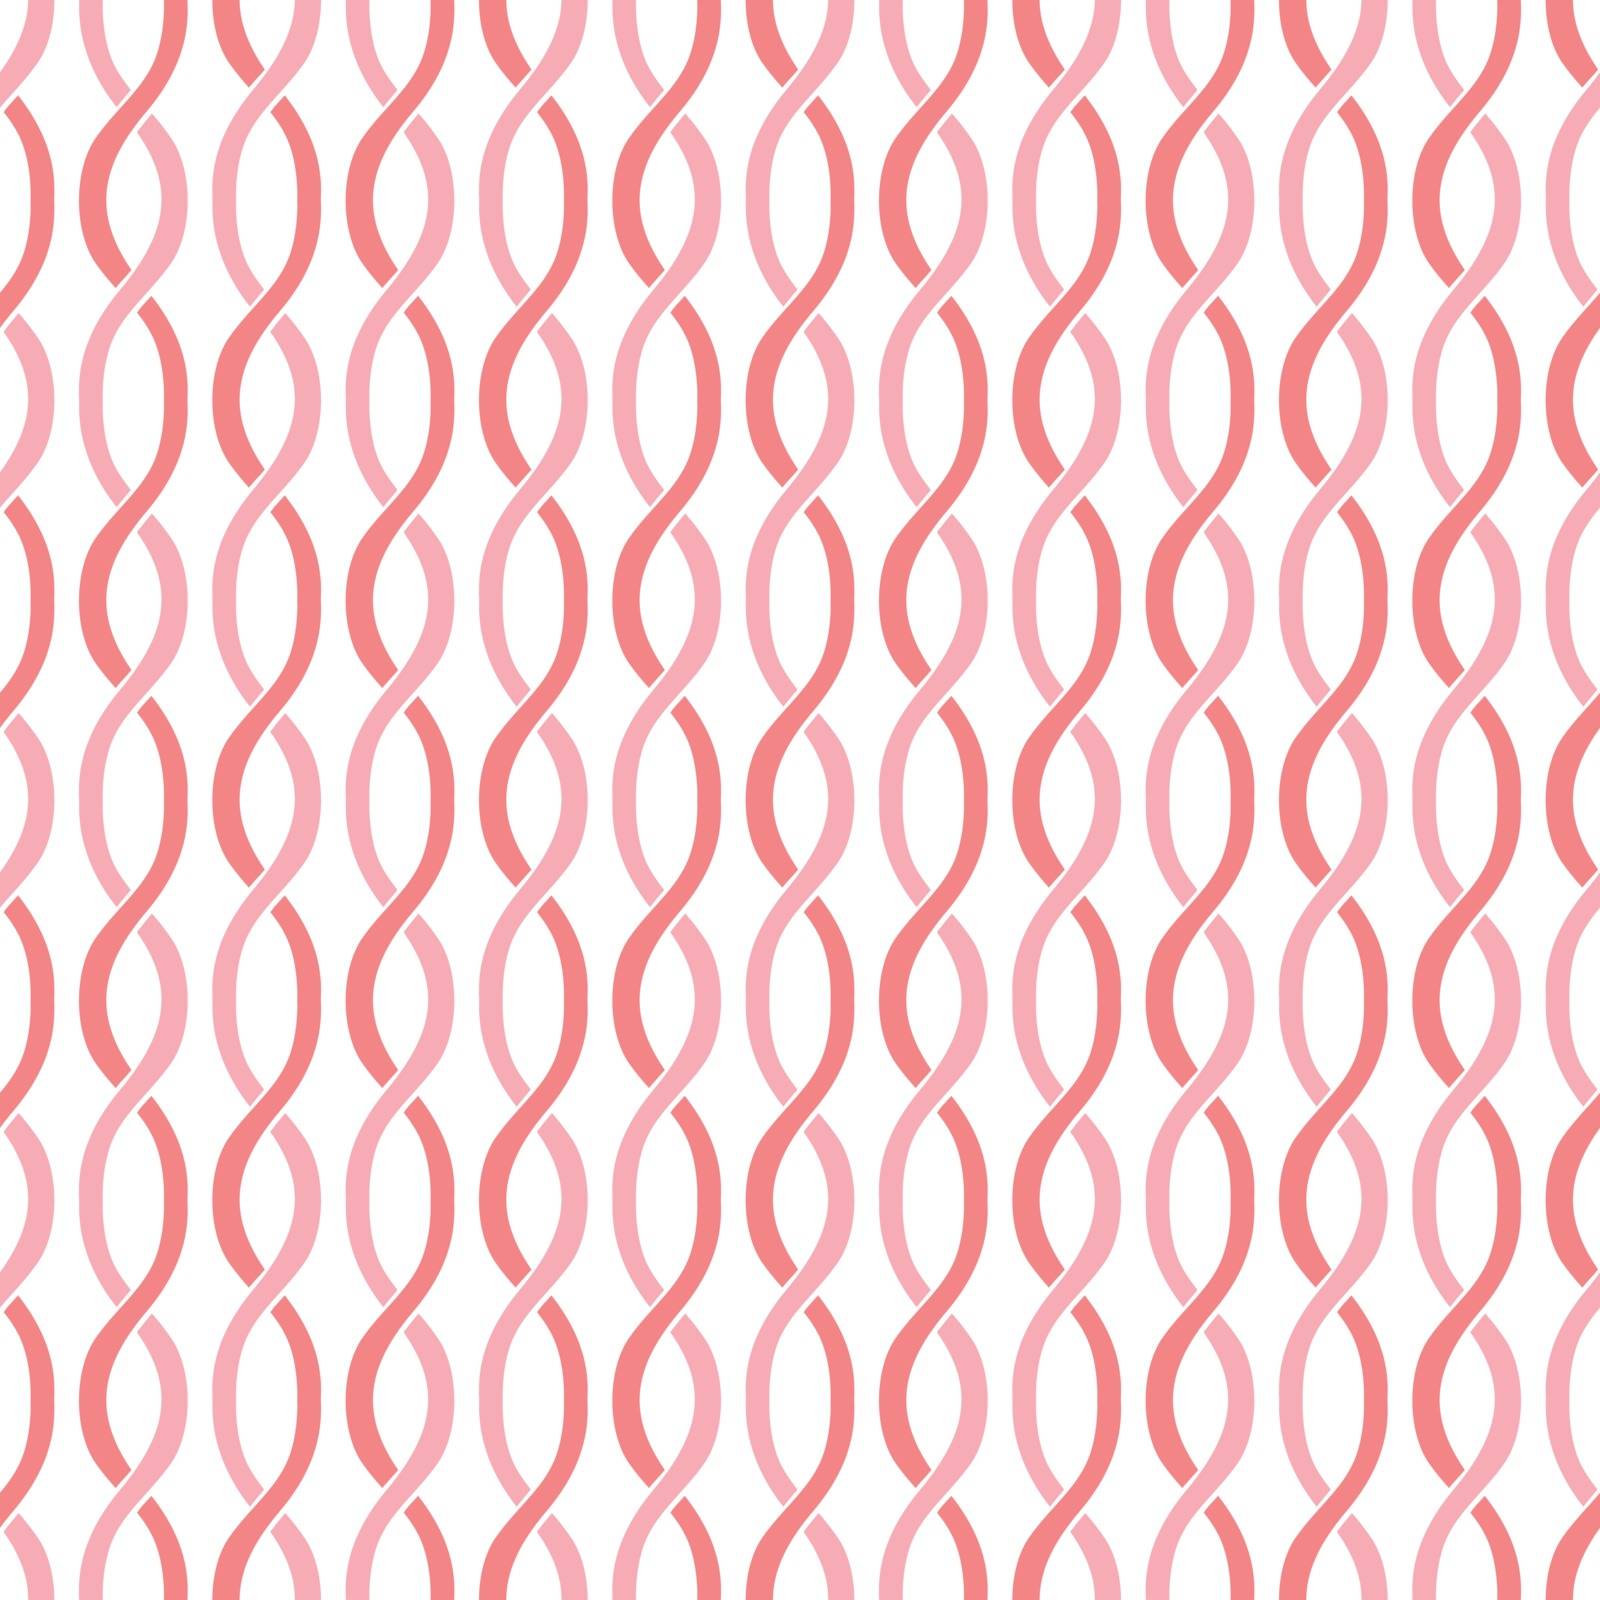 Seamless illustrated pattern made of pink ribbons on white